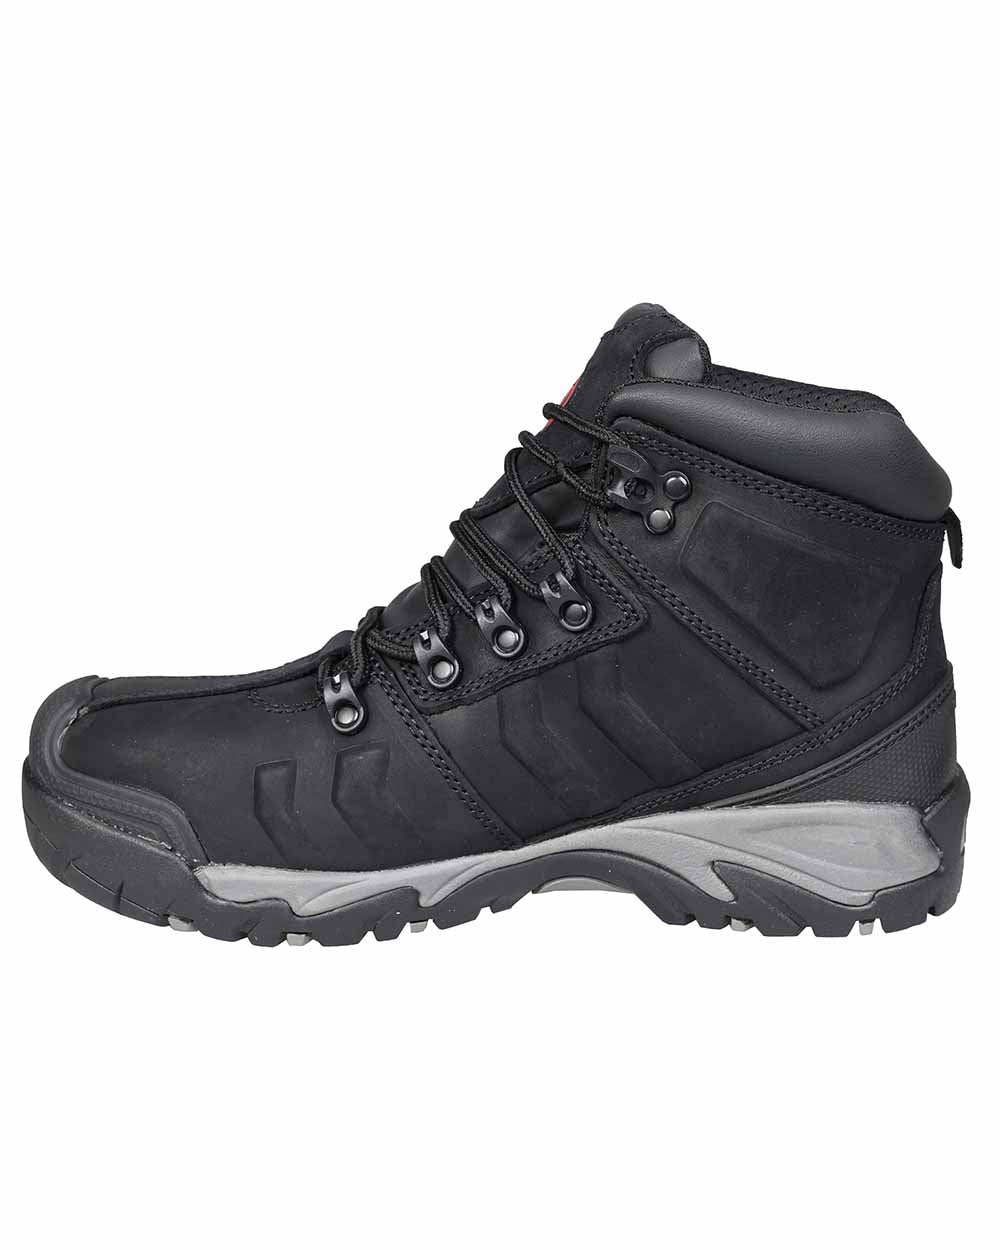 Black Coloured Fort Deben Waterproof Safety Boot On A White Background 